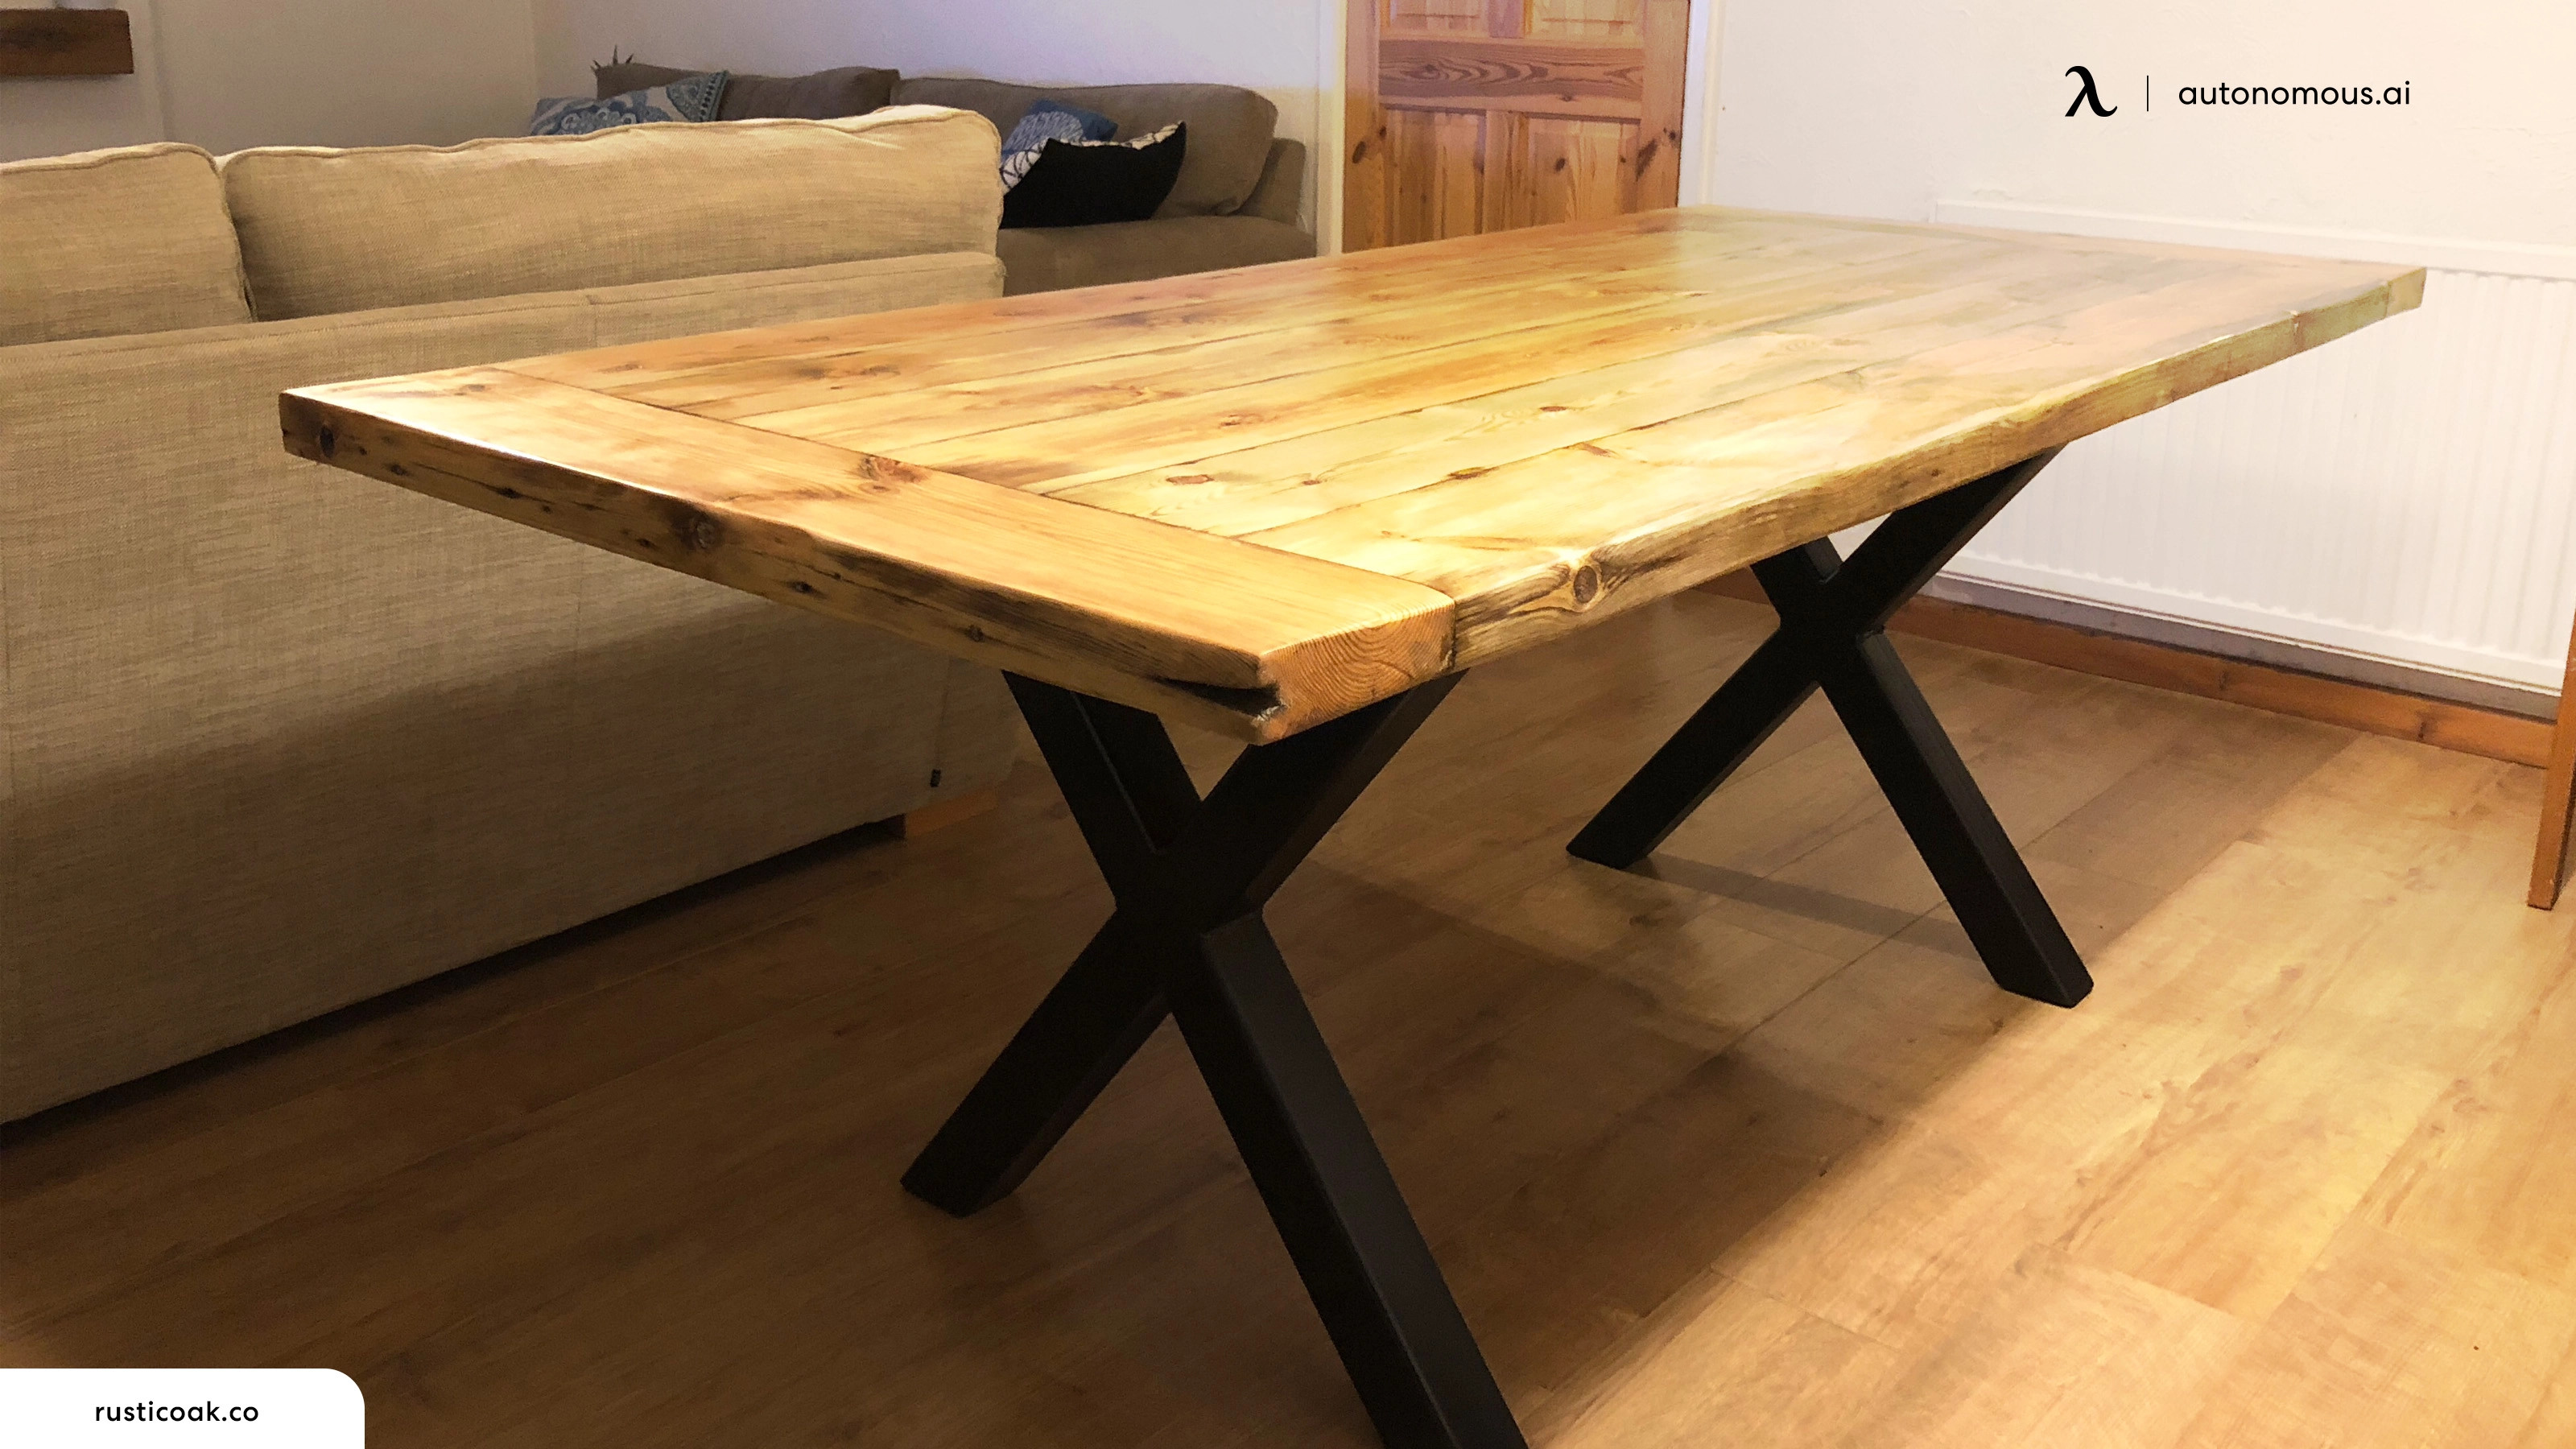 How to Fix a Wobbly Table? Quick and Easy Ways!